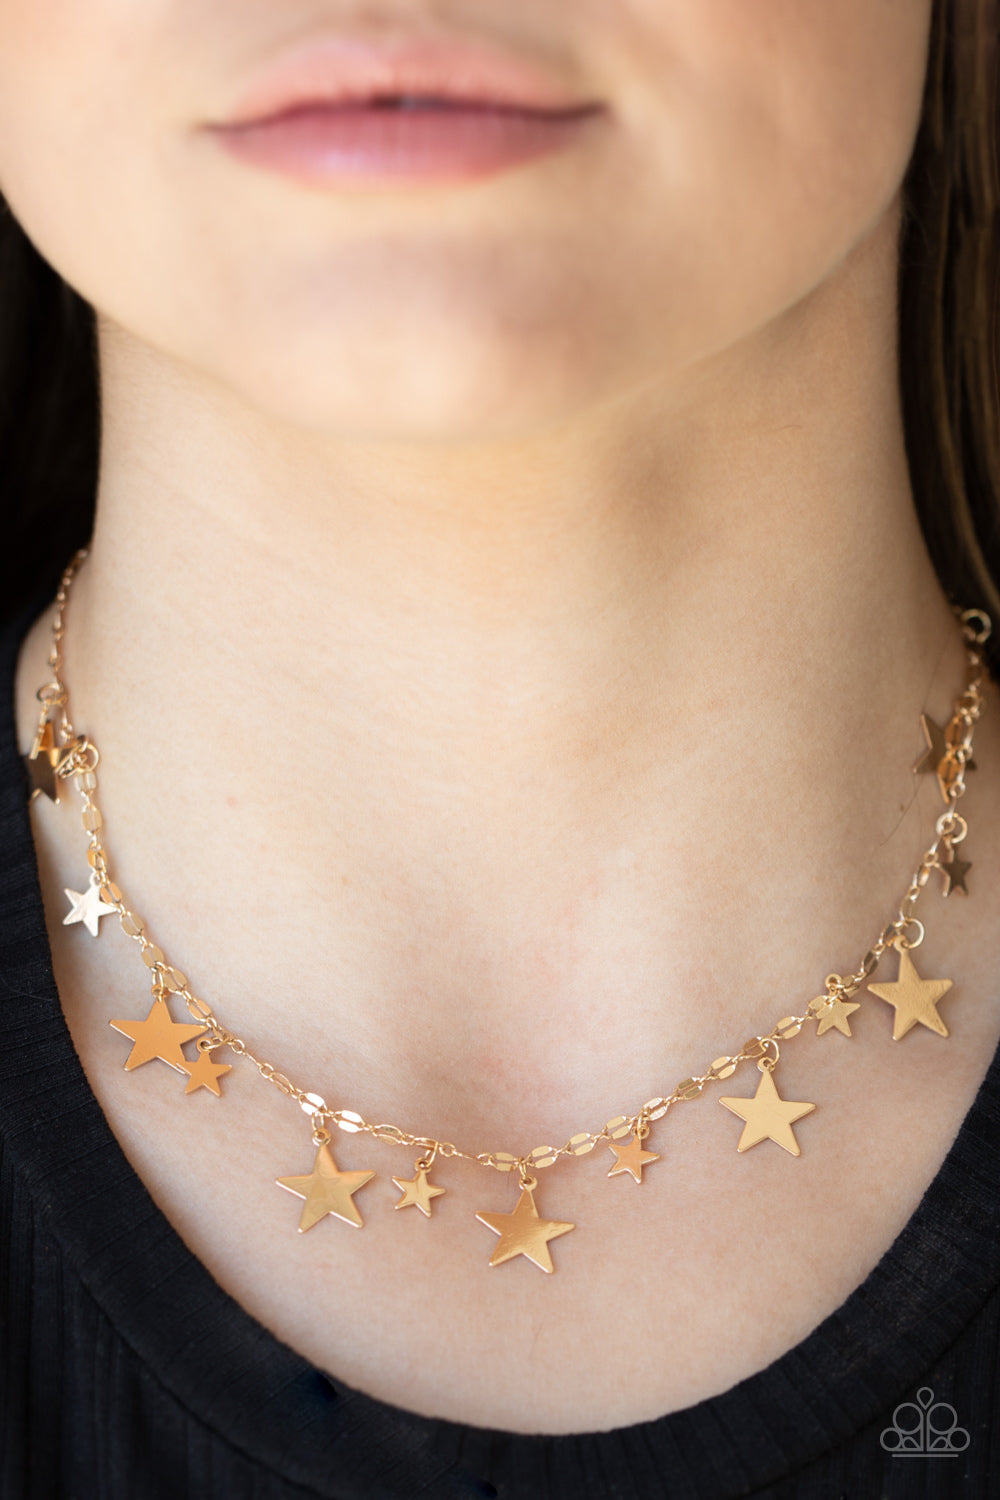 Starry Shindig Gold Necklace - Paparazzi Accessories  Varying in size, dainty shiny gold stars alternate along decorative gold chain, creating a stellar fringe below the collar. Features an adjustable clasp closure.  All Paparazzi Accessories are lead free and nickel free!   Sold as one individual necklace. Includes one pair of matching earrings.